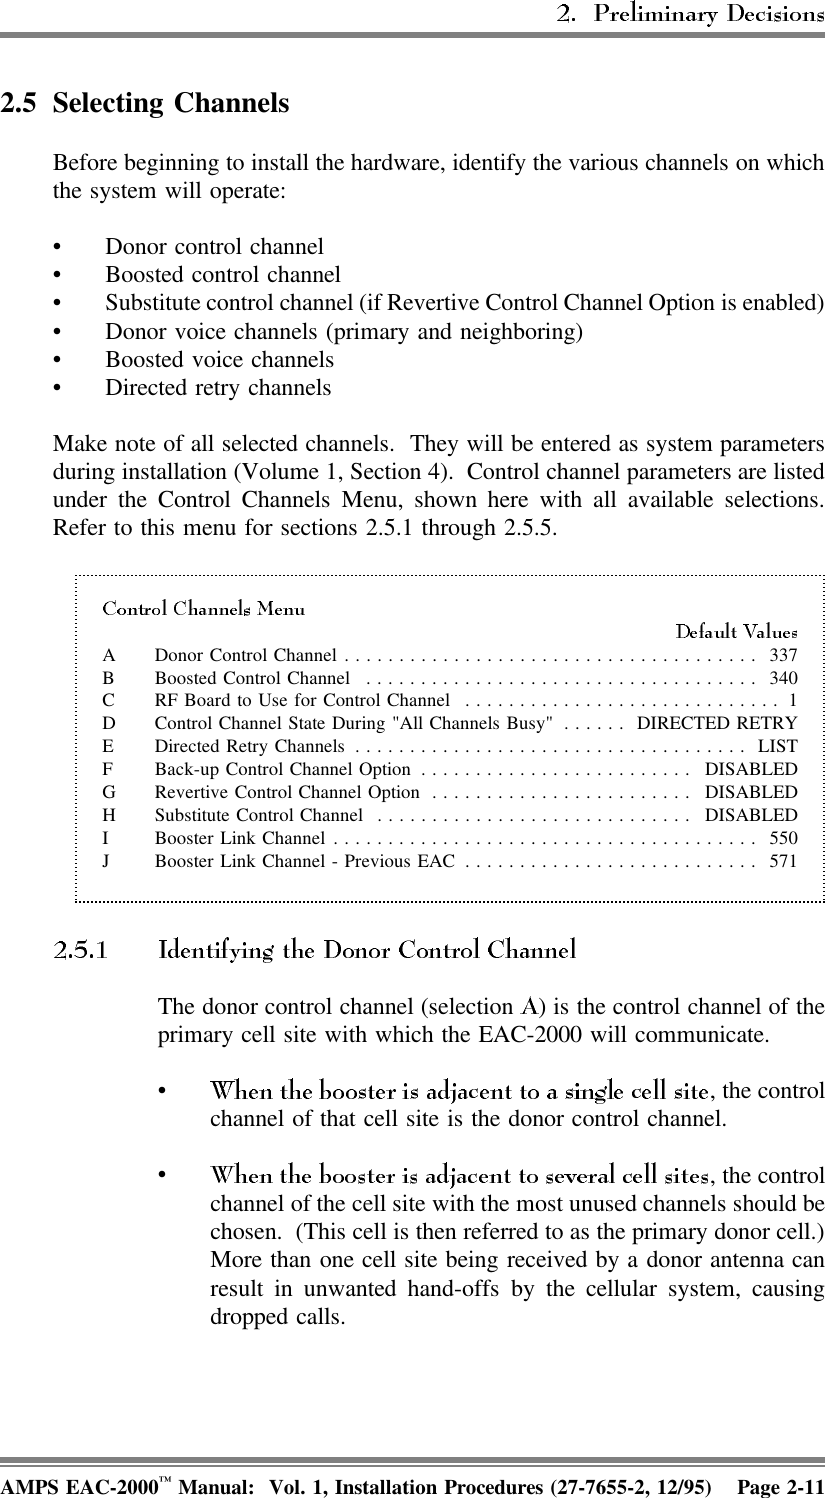 2.5 Selecting Channels Before beginning to install the hardware, identify the various channels on whichthe system will operate: • Donor control channel• Boosted control channel• Substitute control channel (if Revertive Control Channel Option is enabled)• Donor voice channels (primary and neighboring)• Boosted voice channels• Directed retry channelsMake note of all selected channels.  They will be entered as system parametersduring installation (Volume 1, Section 4).  Control channel parameters are listedunder the Control Channels Menu, shown here with all available selections.Refer to this menu for sections 2.5.1 through 2.5.5.A Donor Control Channel ...................................... 337B Boosted Control Channel .................................... 340C RF Board to Use for Control Channel ............................. 1D Control Channel State During &quot;All Channels Busy&quot; ...... DIRECTED RETRYE Directed Retry Channels .................................... LISTF Back-up Control Channel Option ......................... DISABLEDG Revertive Control Channel Option ........................ DISABLEDH Substitute Control Channel ............................. DISABLEDI Booster Link Channel....................................... 550J Booster Link Channel - Previous EAC ........................... 571  The donor control channel (selection  ) is the control channel of theprimary cell site with which the EAC-2000 will communicate.•, the controlchannel of that cell site is the donor control channel. •, the controlchannel of the cell site with the most unused channels should bechosen.  (This cell is then referred to as the primary donor cell.)More than one cell site being received by a donor antenna canresult in unwanted hand-offs by the cellular system, causingdropped calls.AMPS EAC-2000™ Manual:  Vol. 1, Installation Procedures (27-7655-2, 12/95) Page 2-11